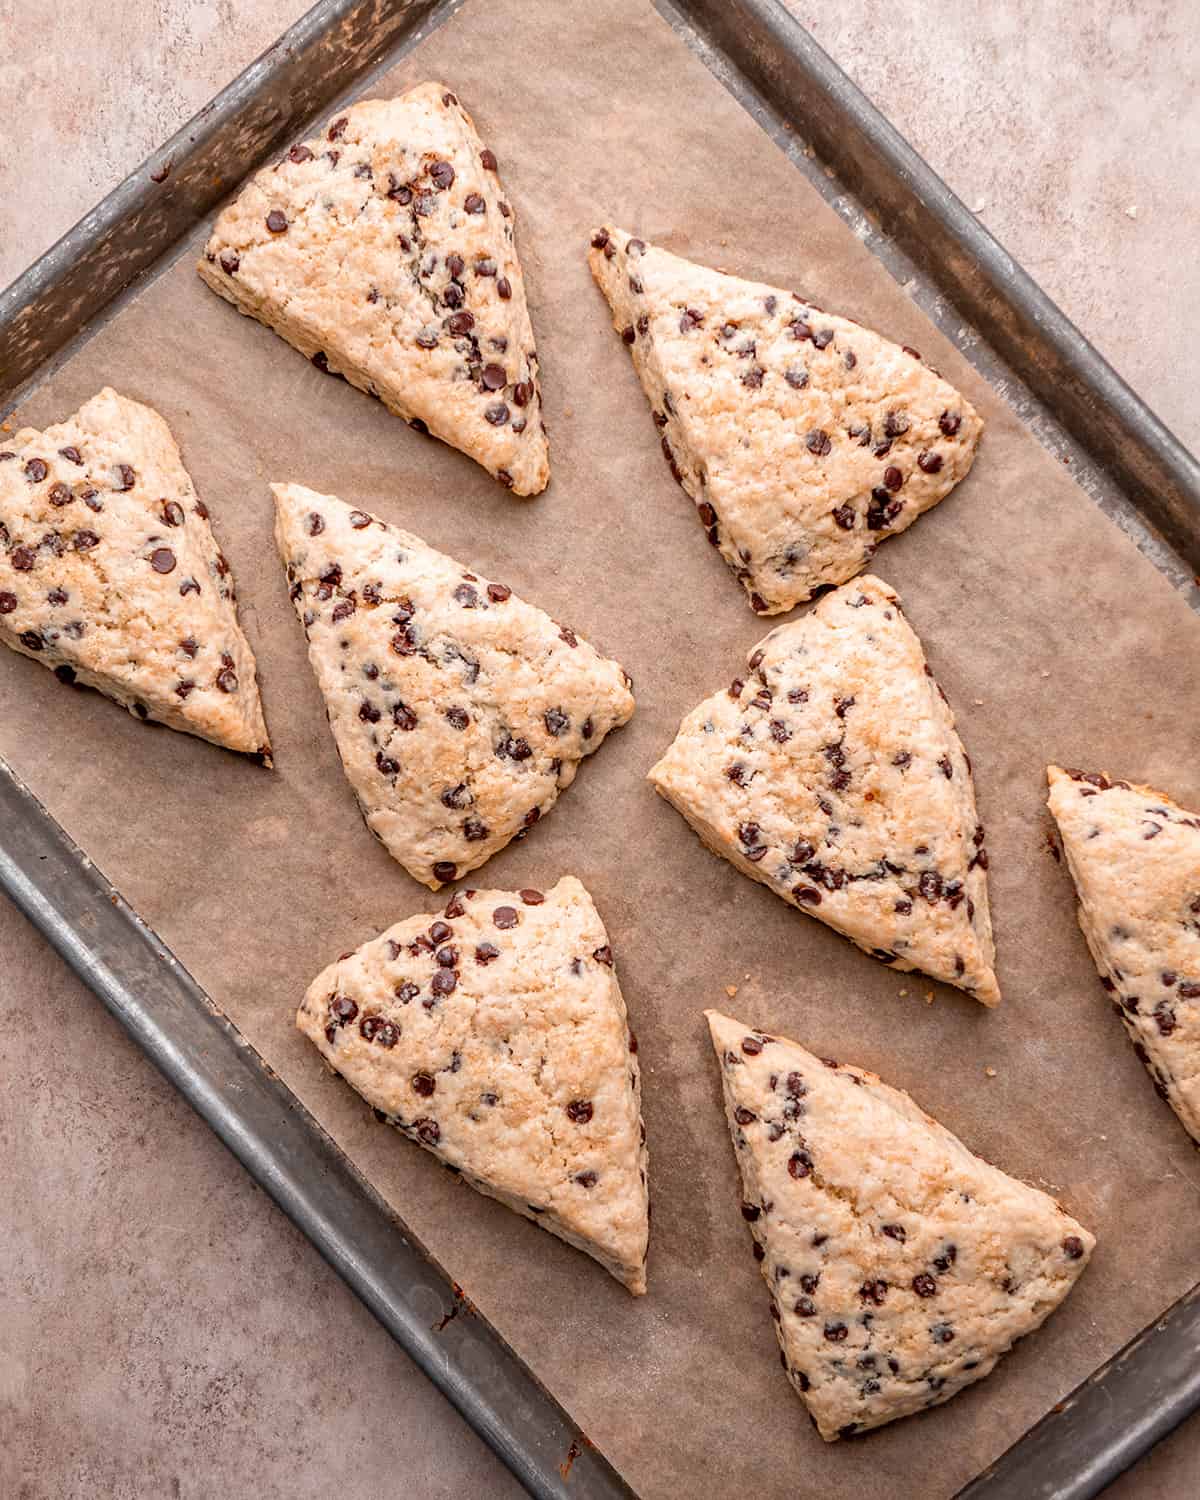 Chocolate Chip Scones on a baking sheet after being baked